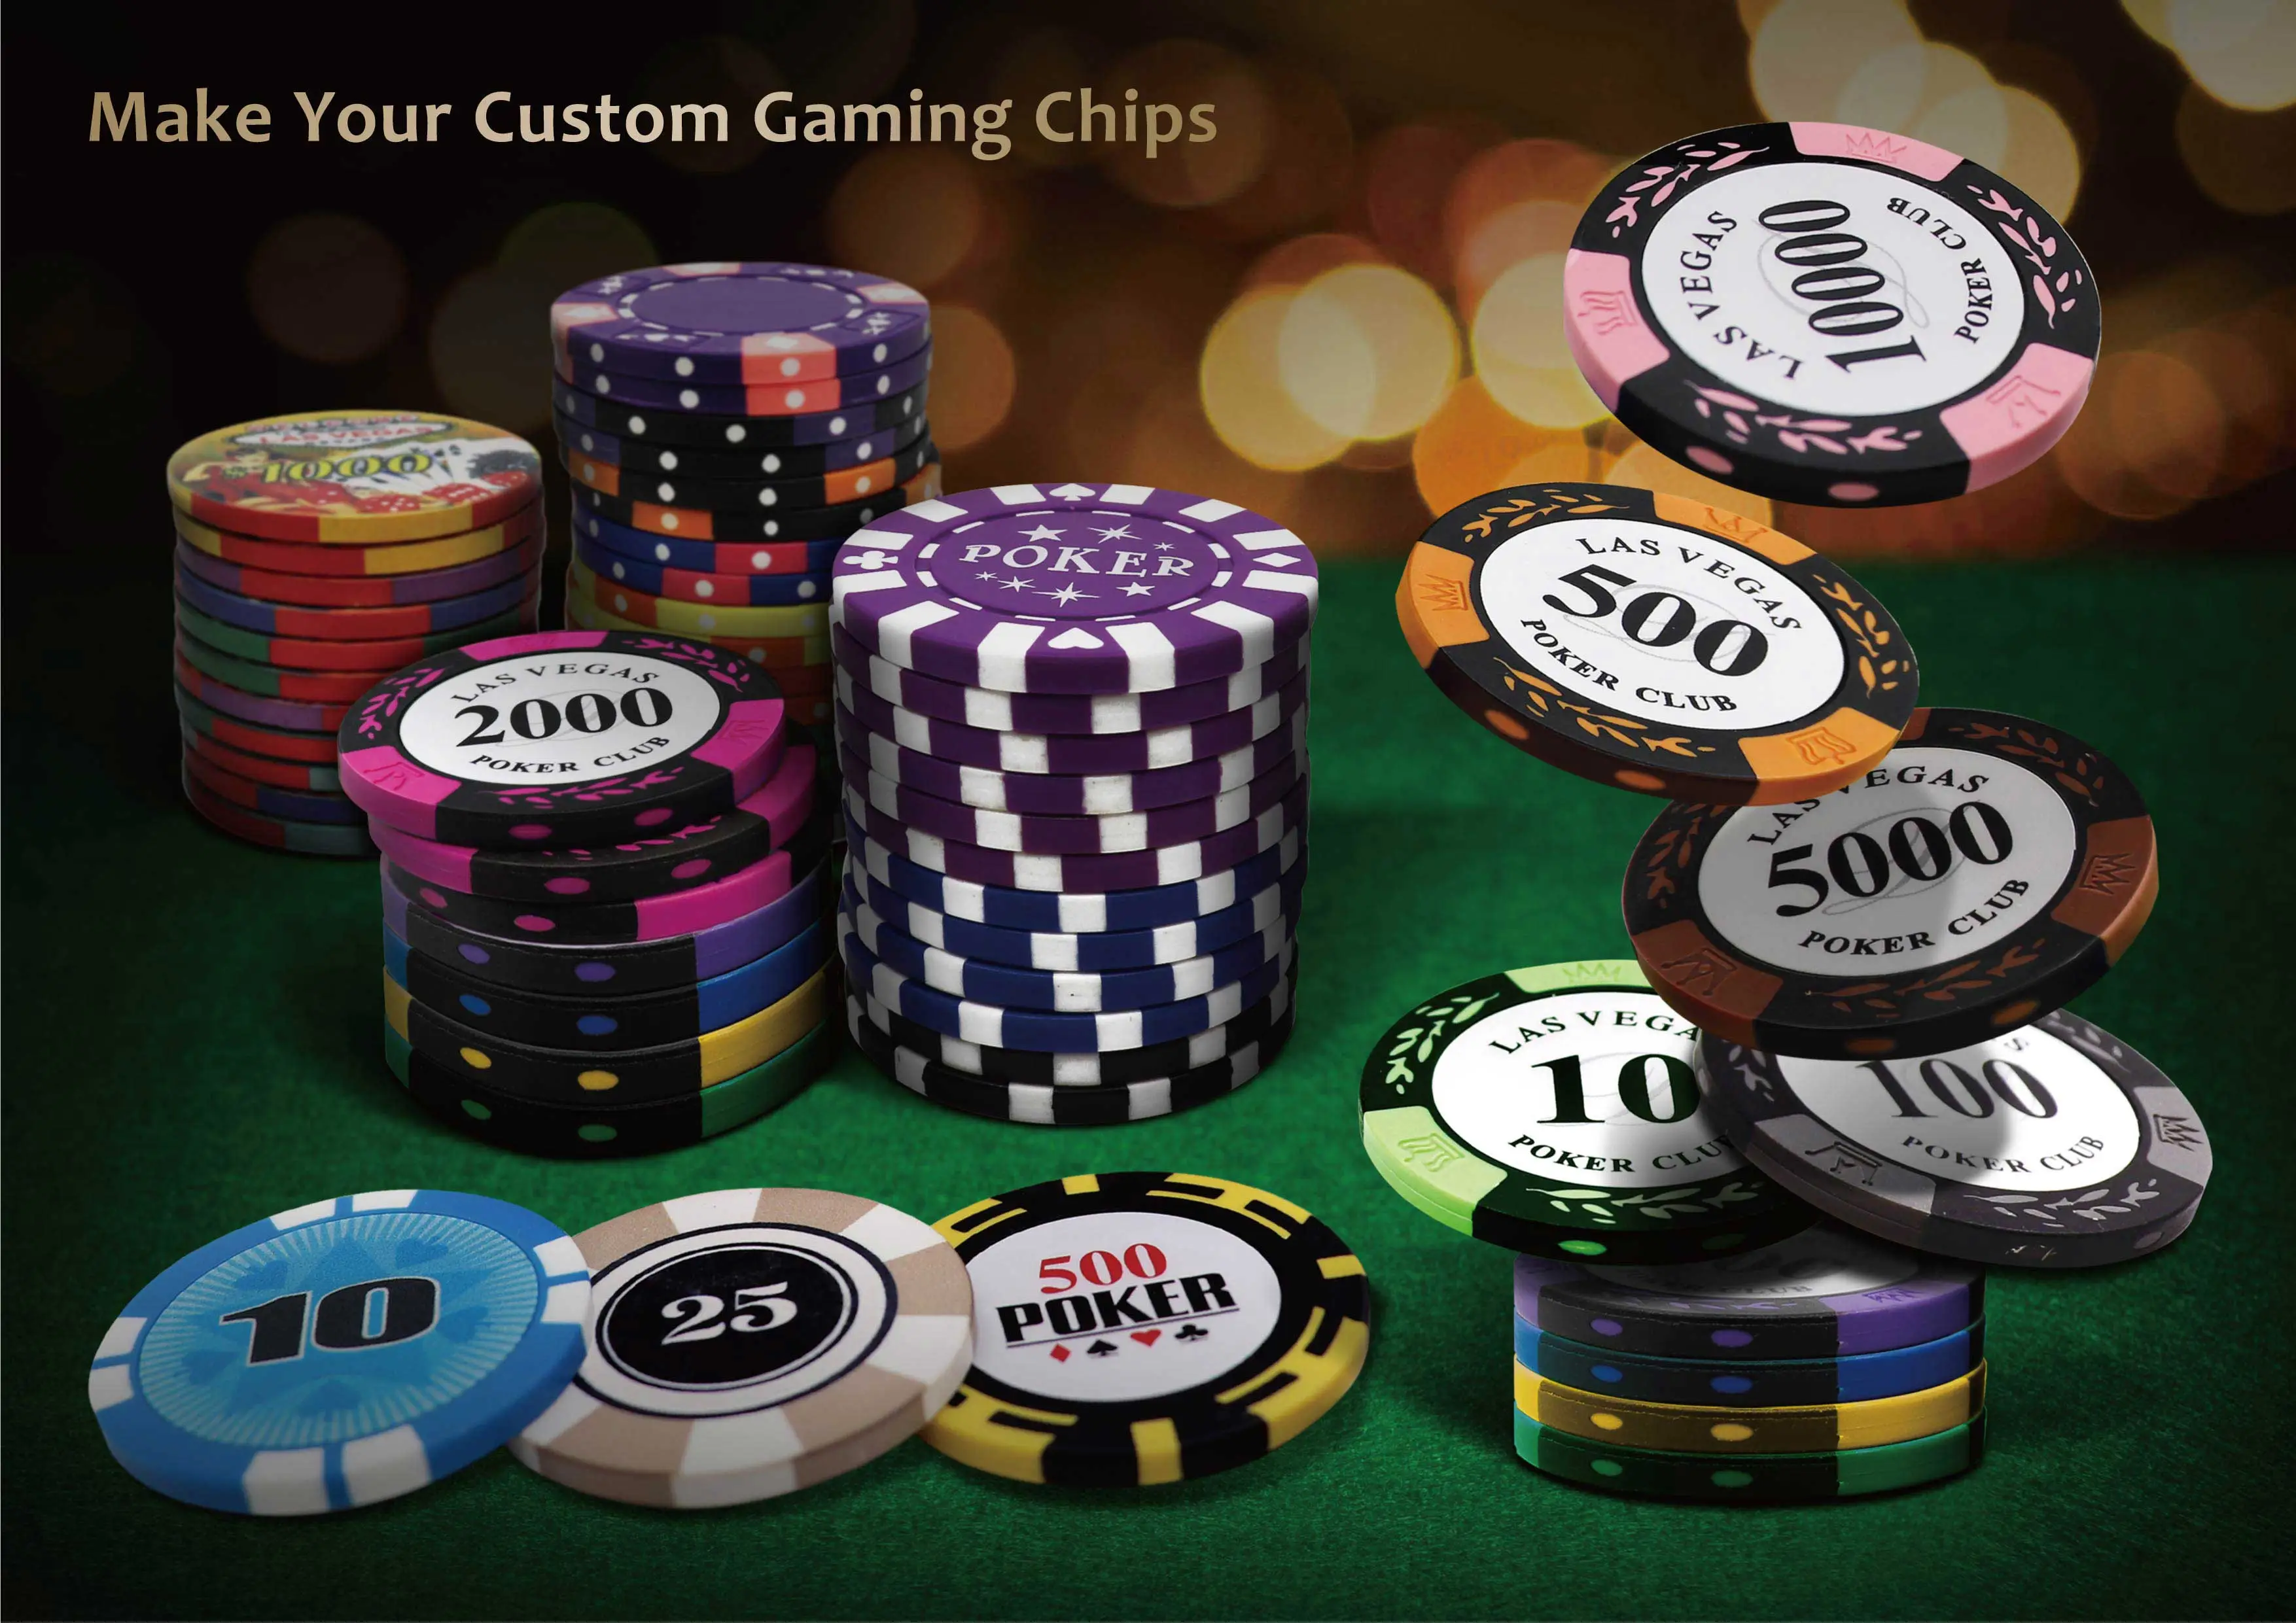 Make Your Custom Gaming Chips!